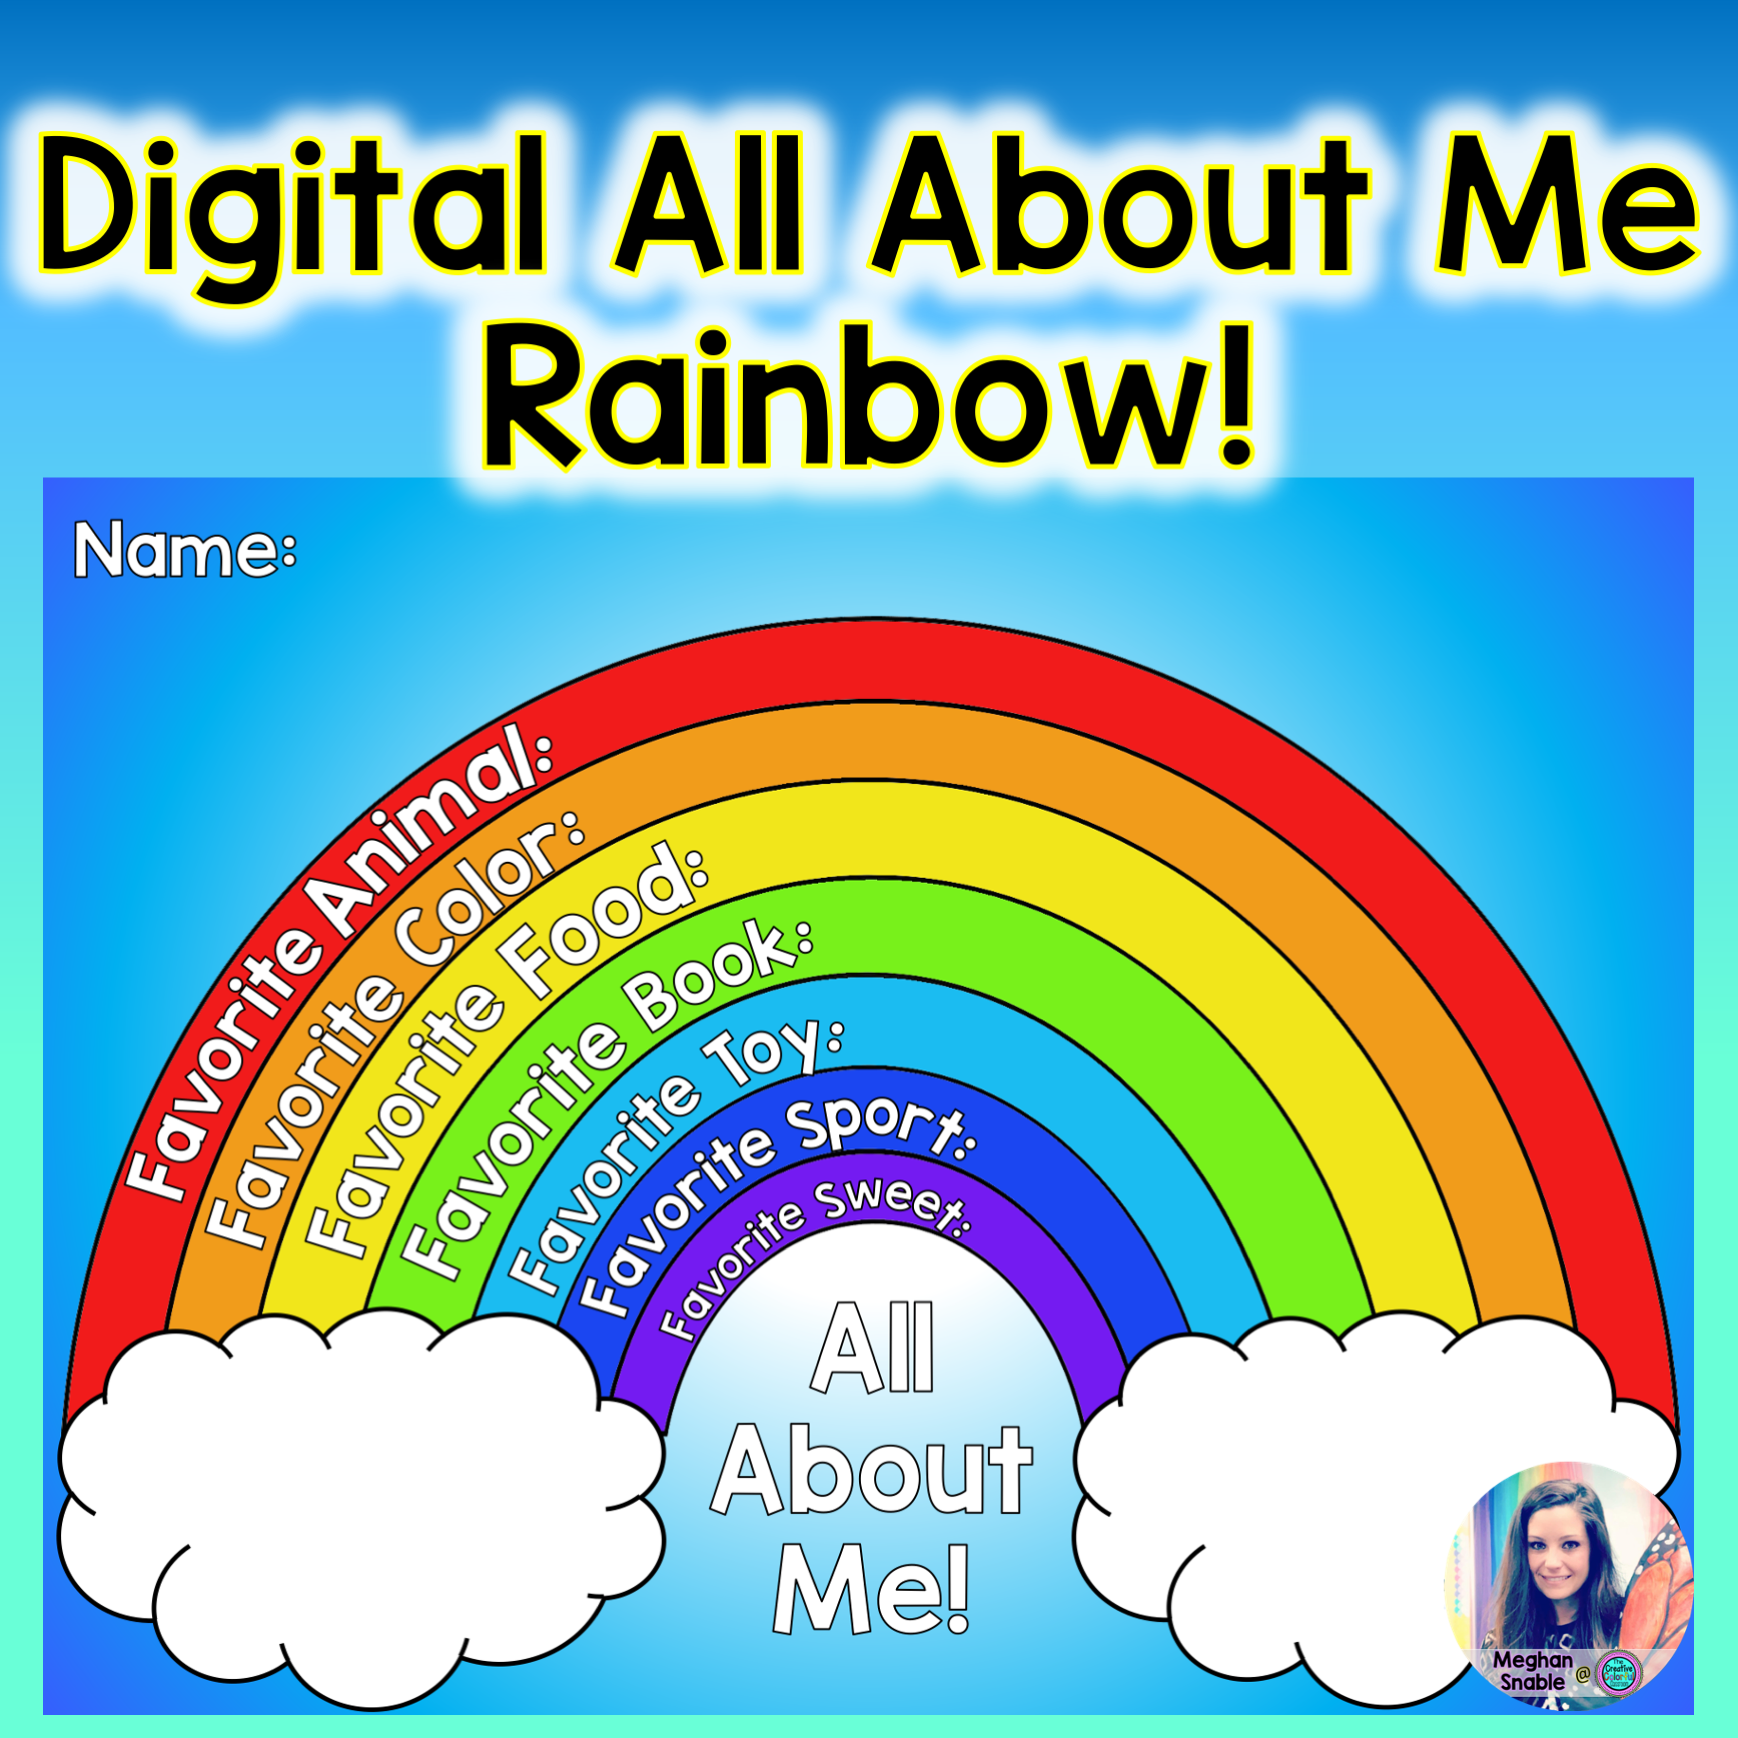 the-creative-colorful-classroom-all-about-me-3-d-rainbow-poster